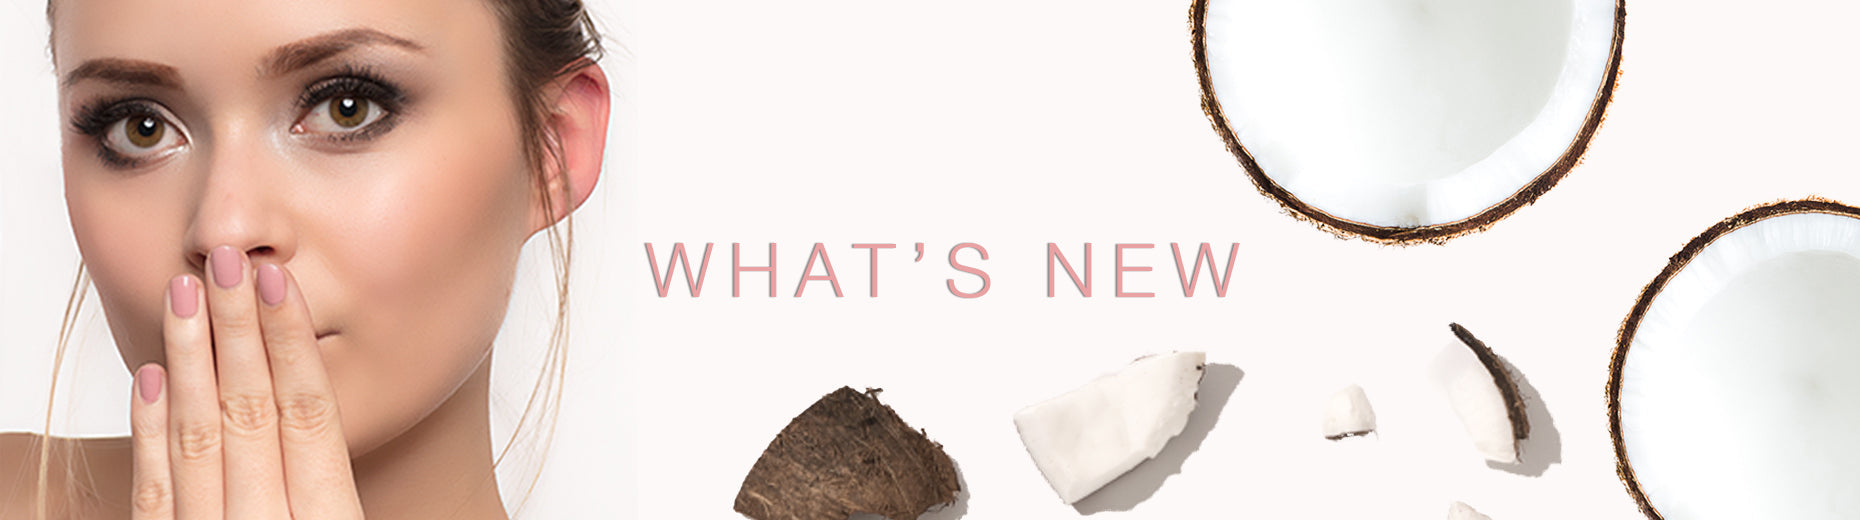 banner what's new with a image of coconuts